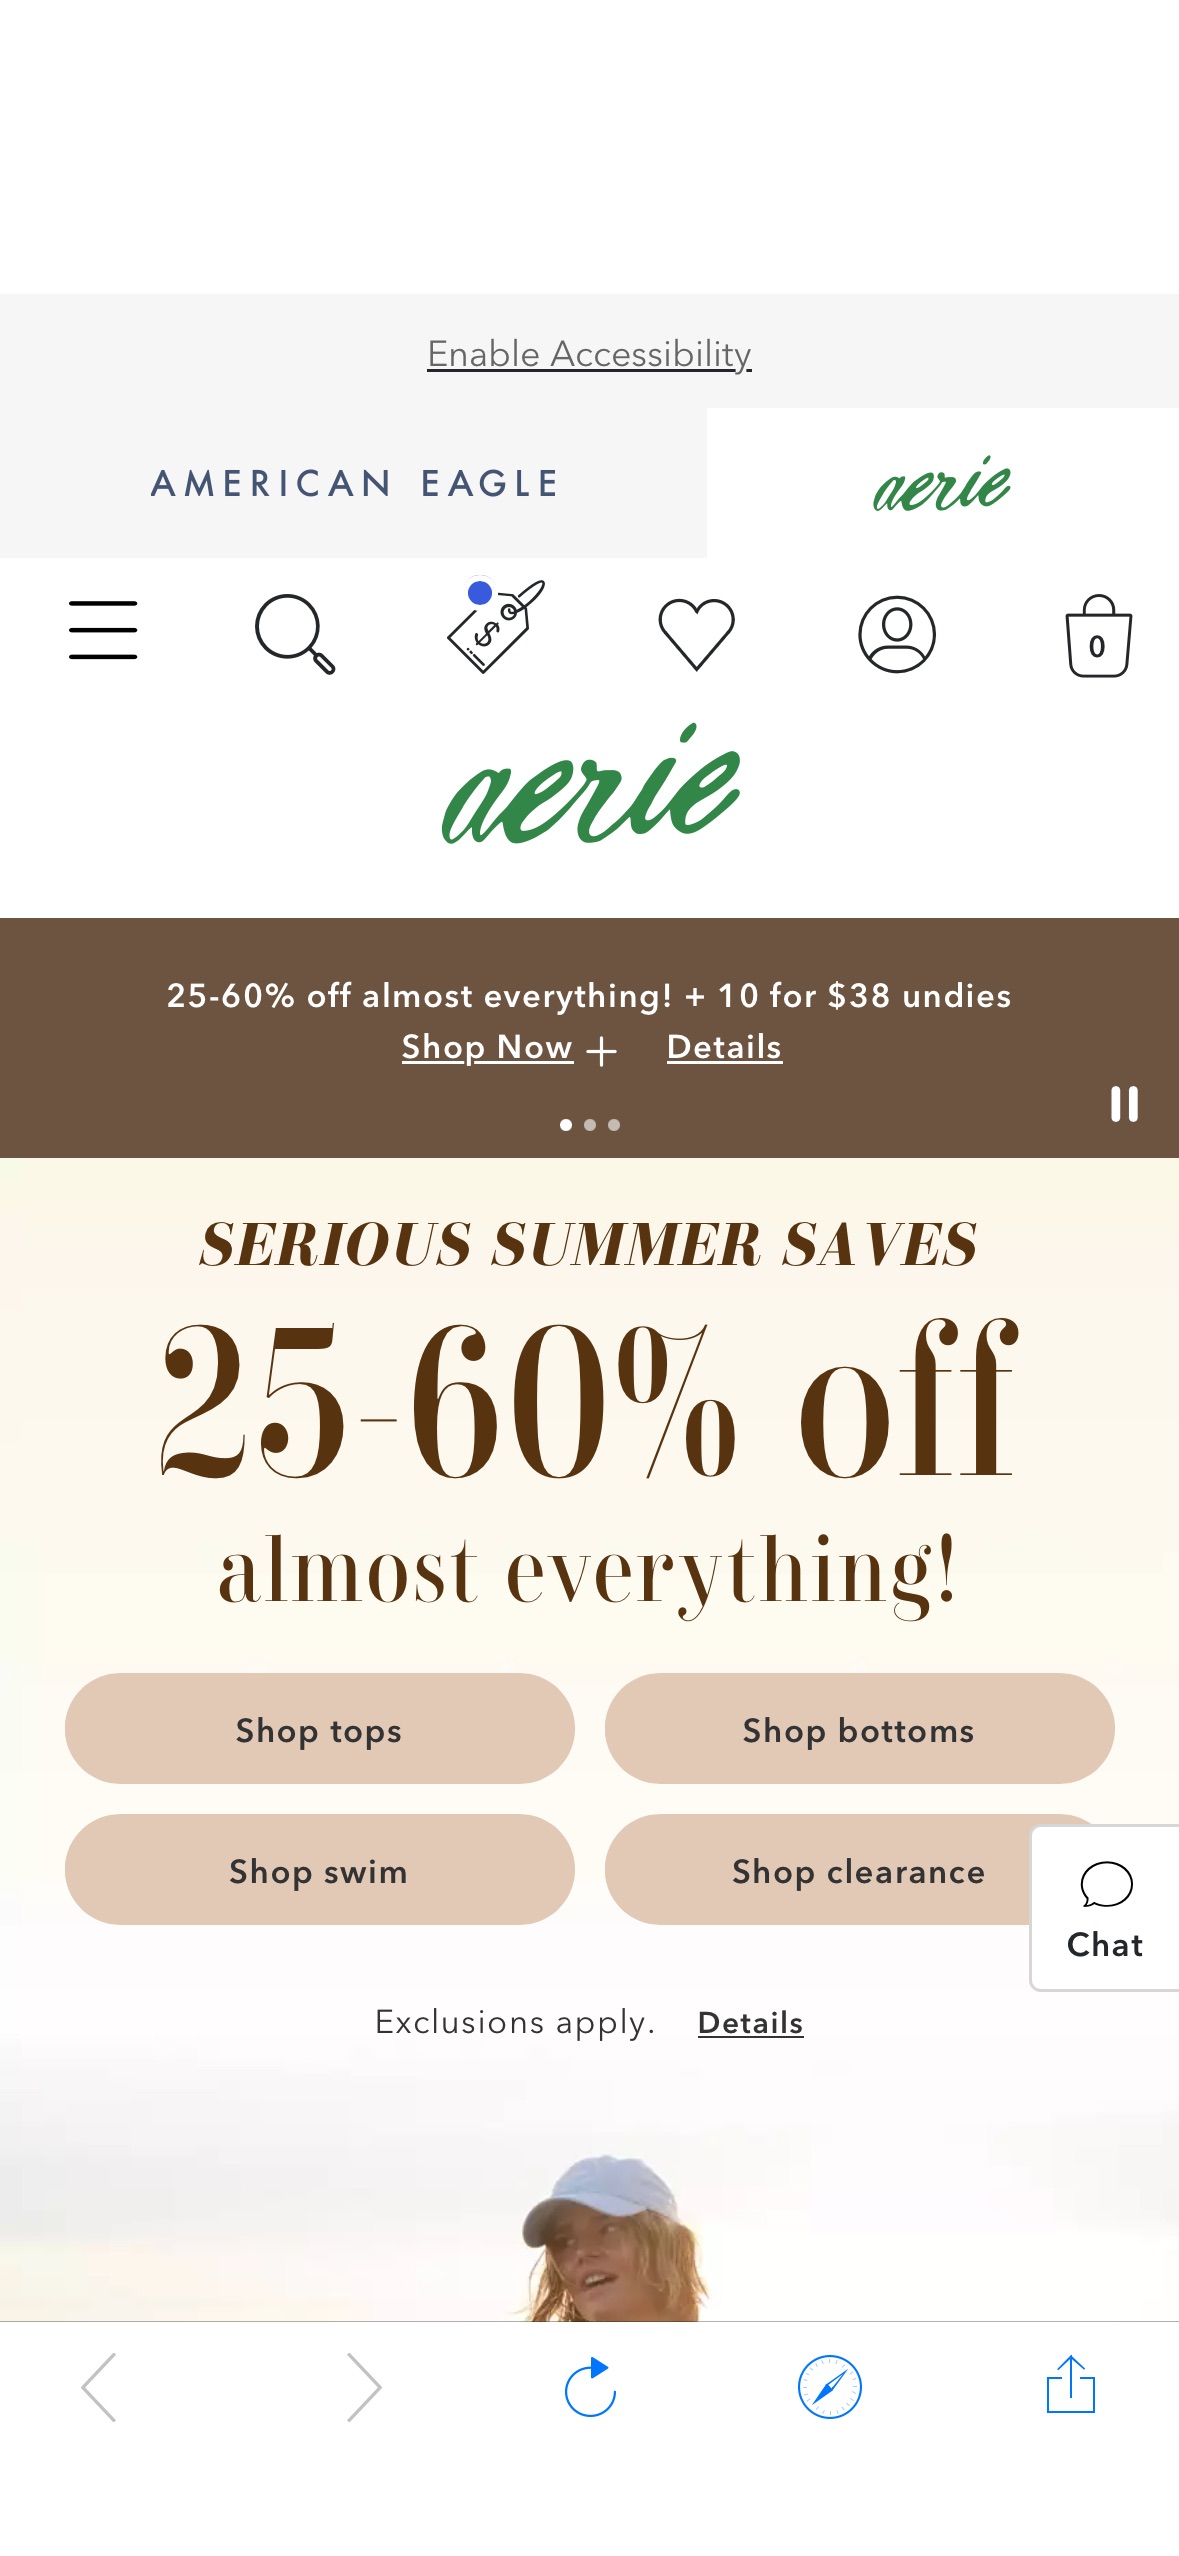 Through May 2nd at 5:00 AM ET, head to Aerie to score 25%-60% off almost everything! You can also save up to 70% on clearance items! Save on tops, bottoms, swim and more